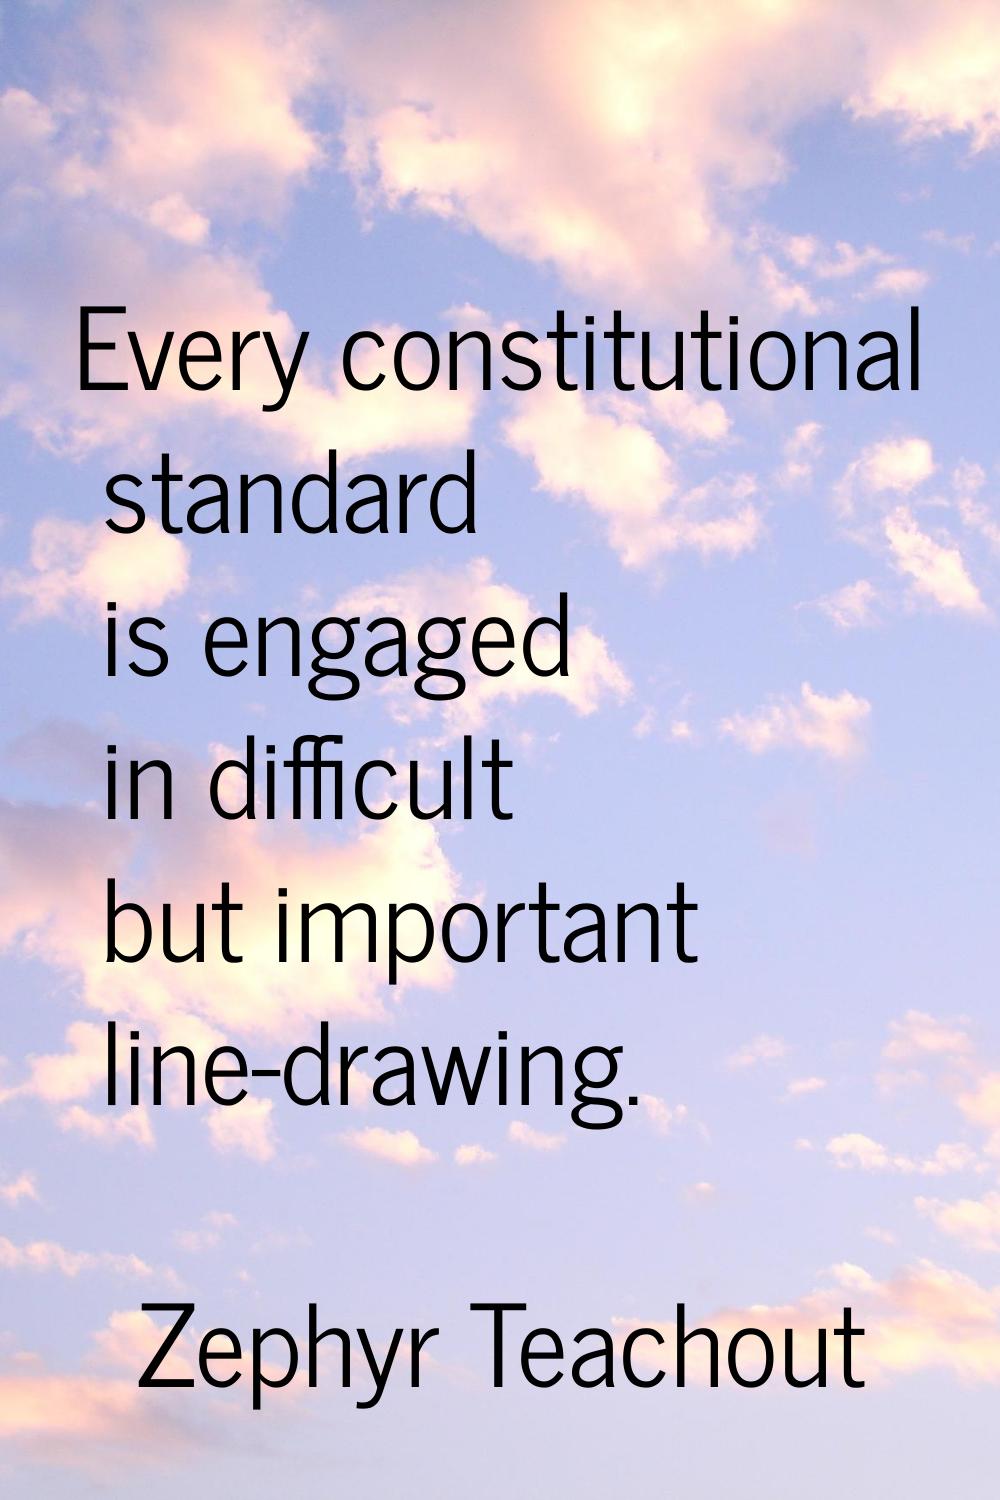 Every constitutional standard is engaged in difficult but important line-drawing.